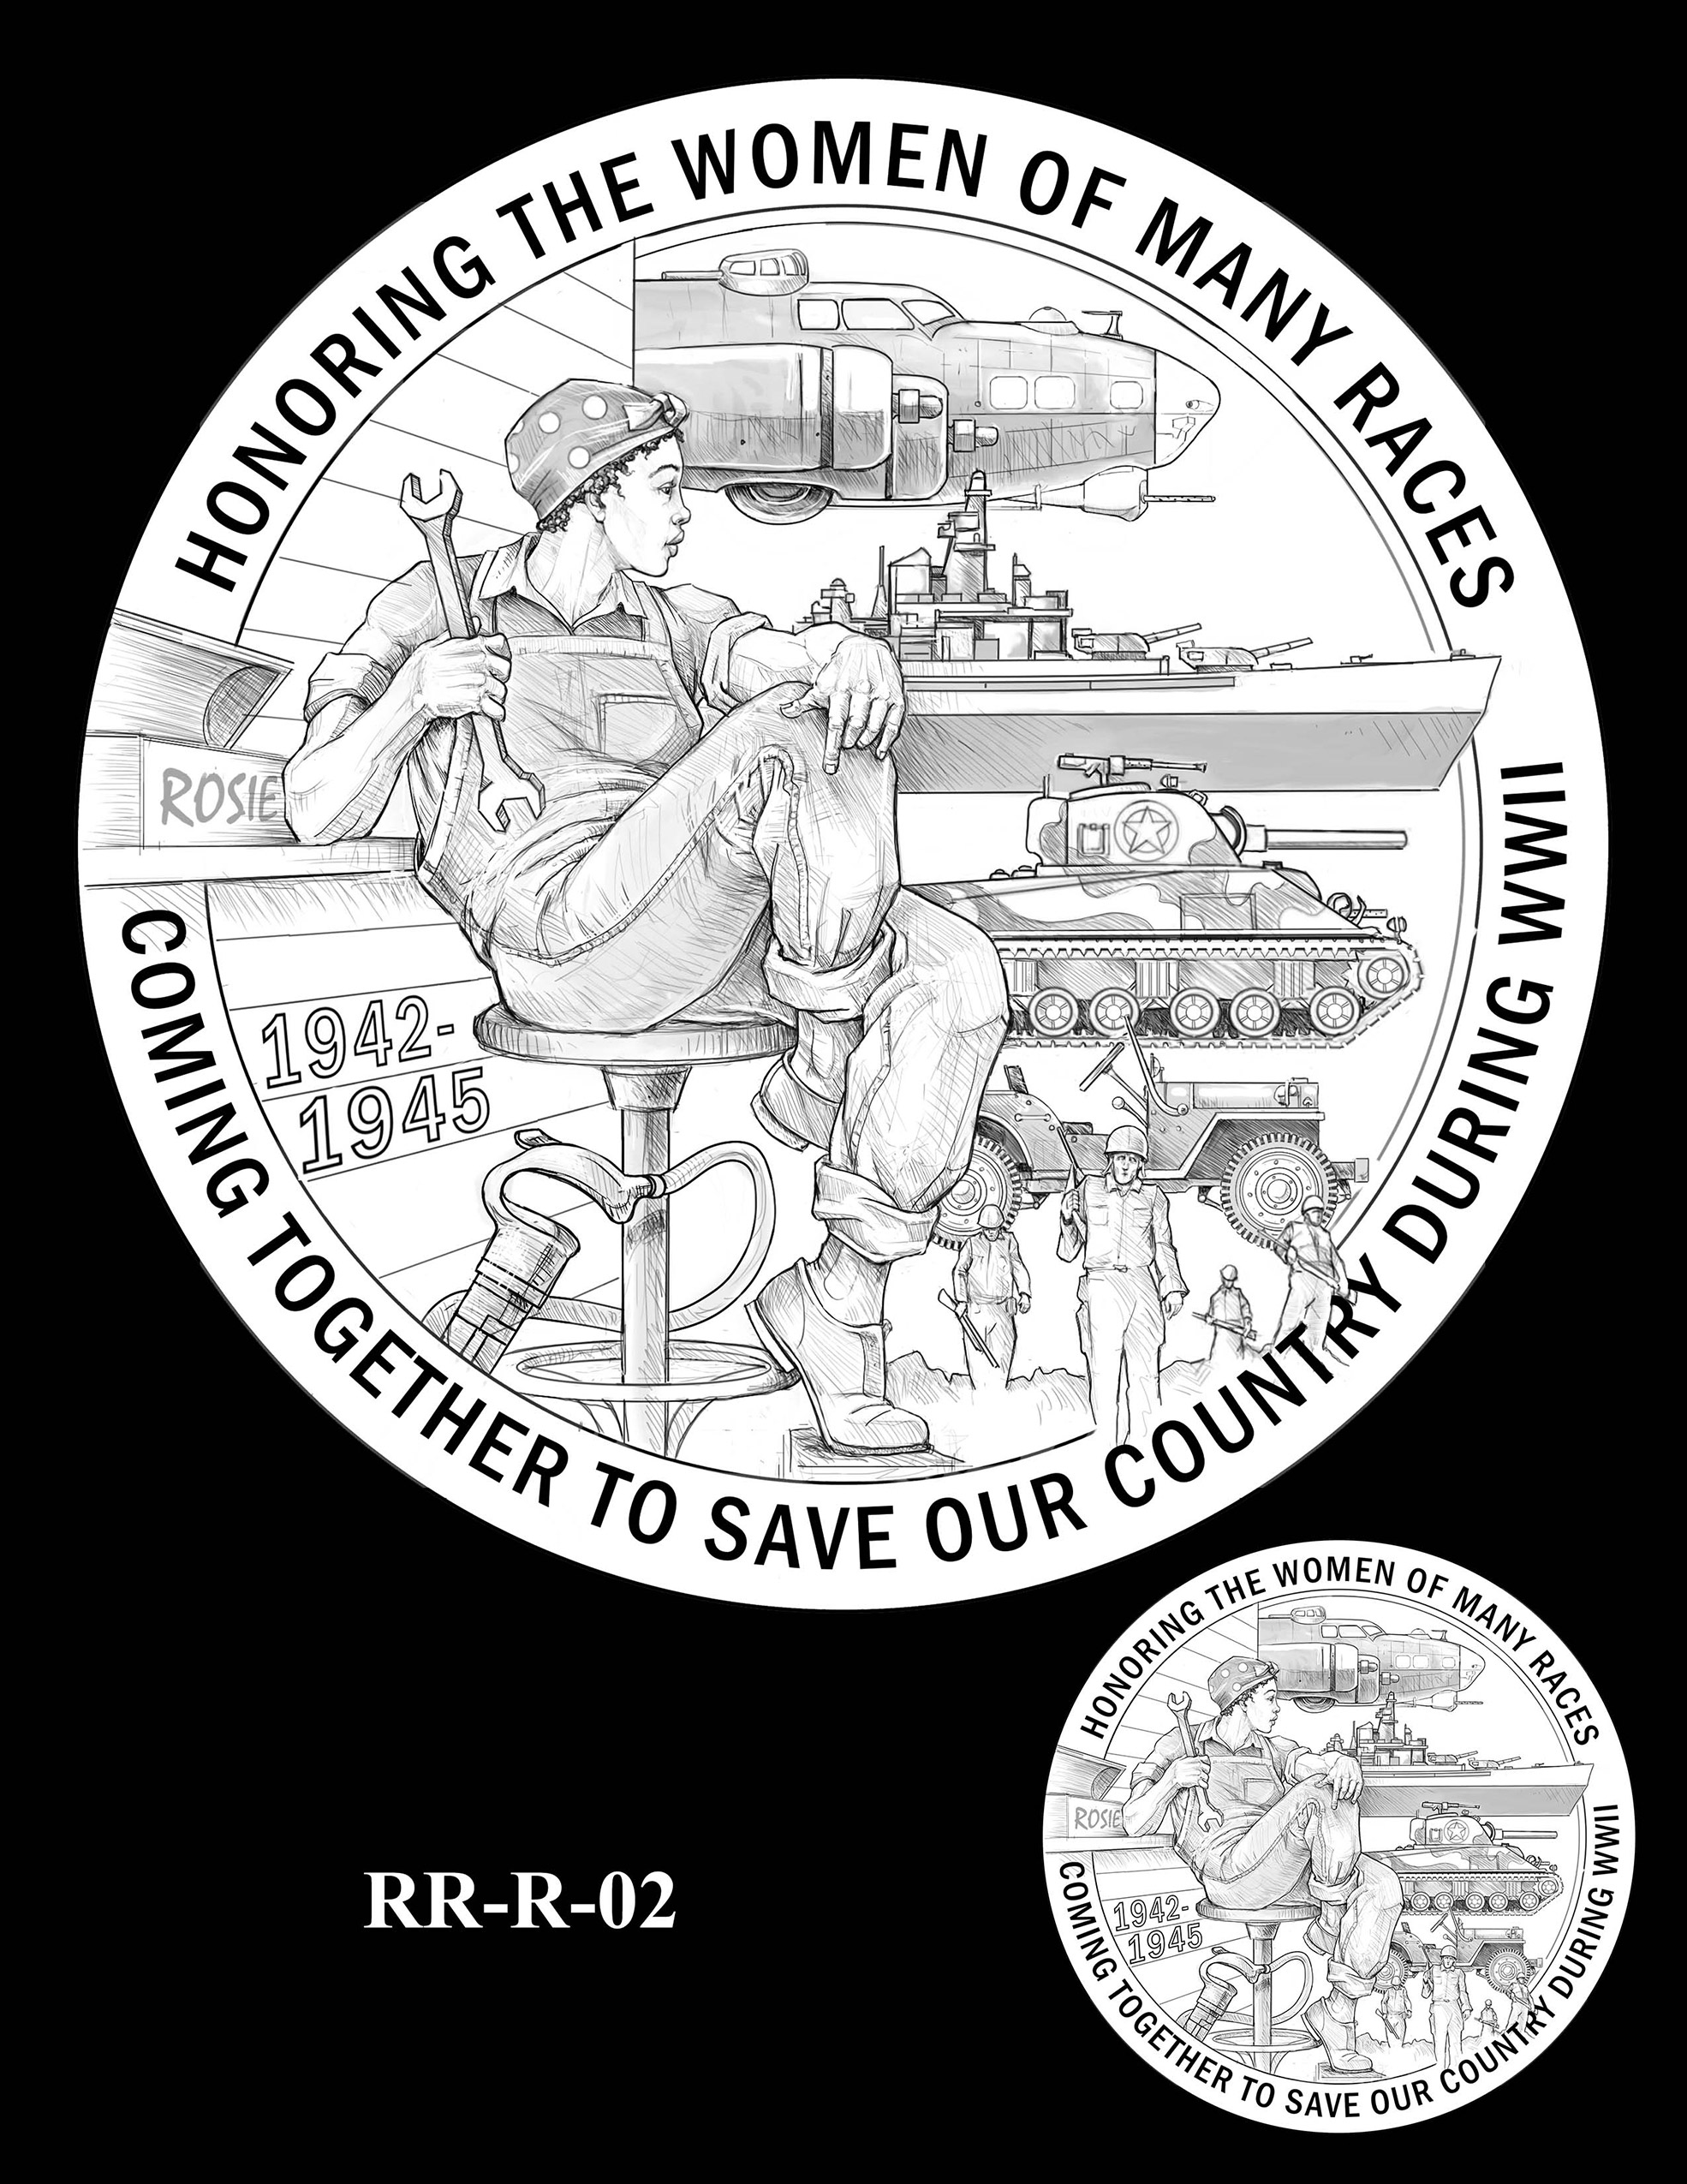 RR-R-02 -- Rosie the Riveter Congressional Gold Medal